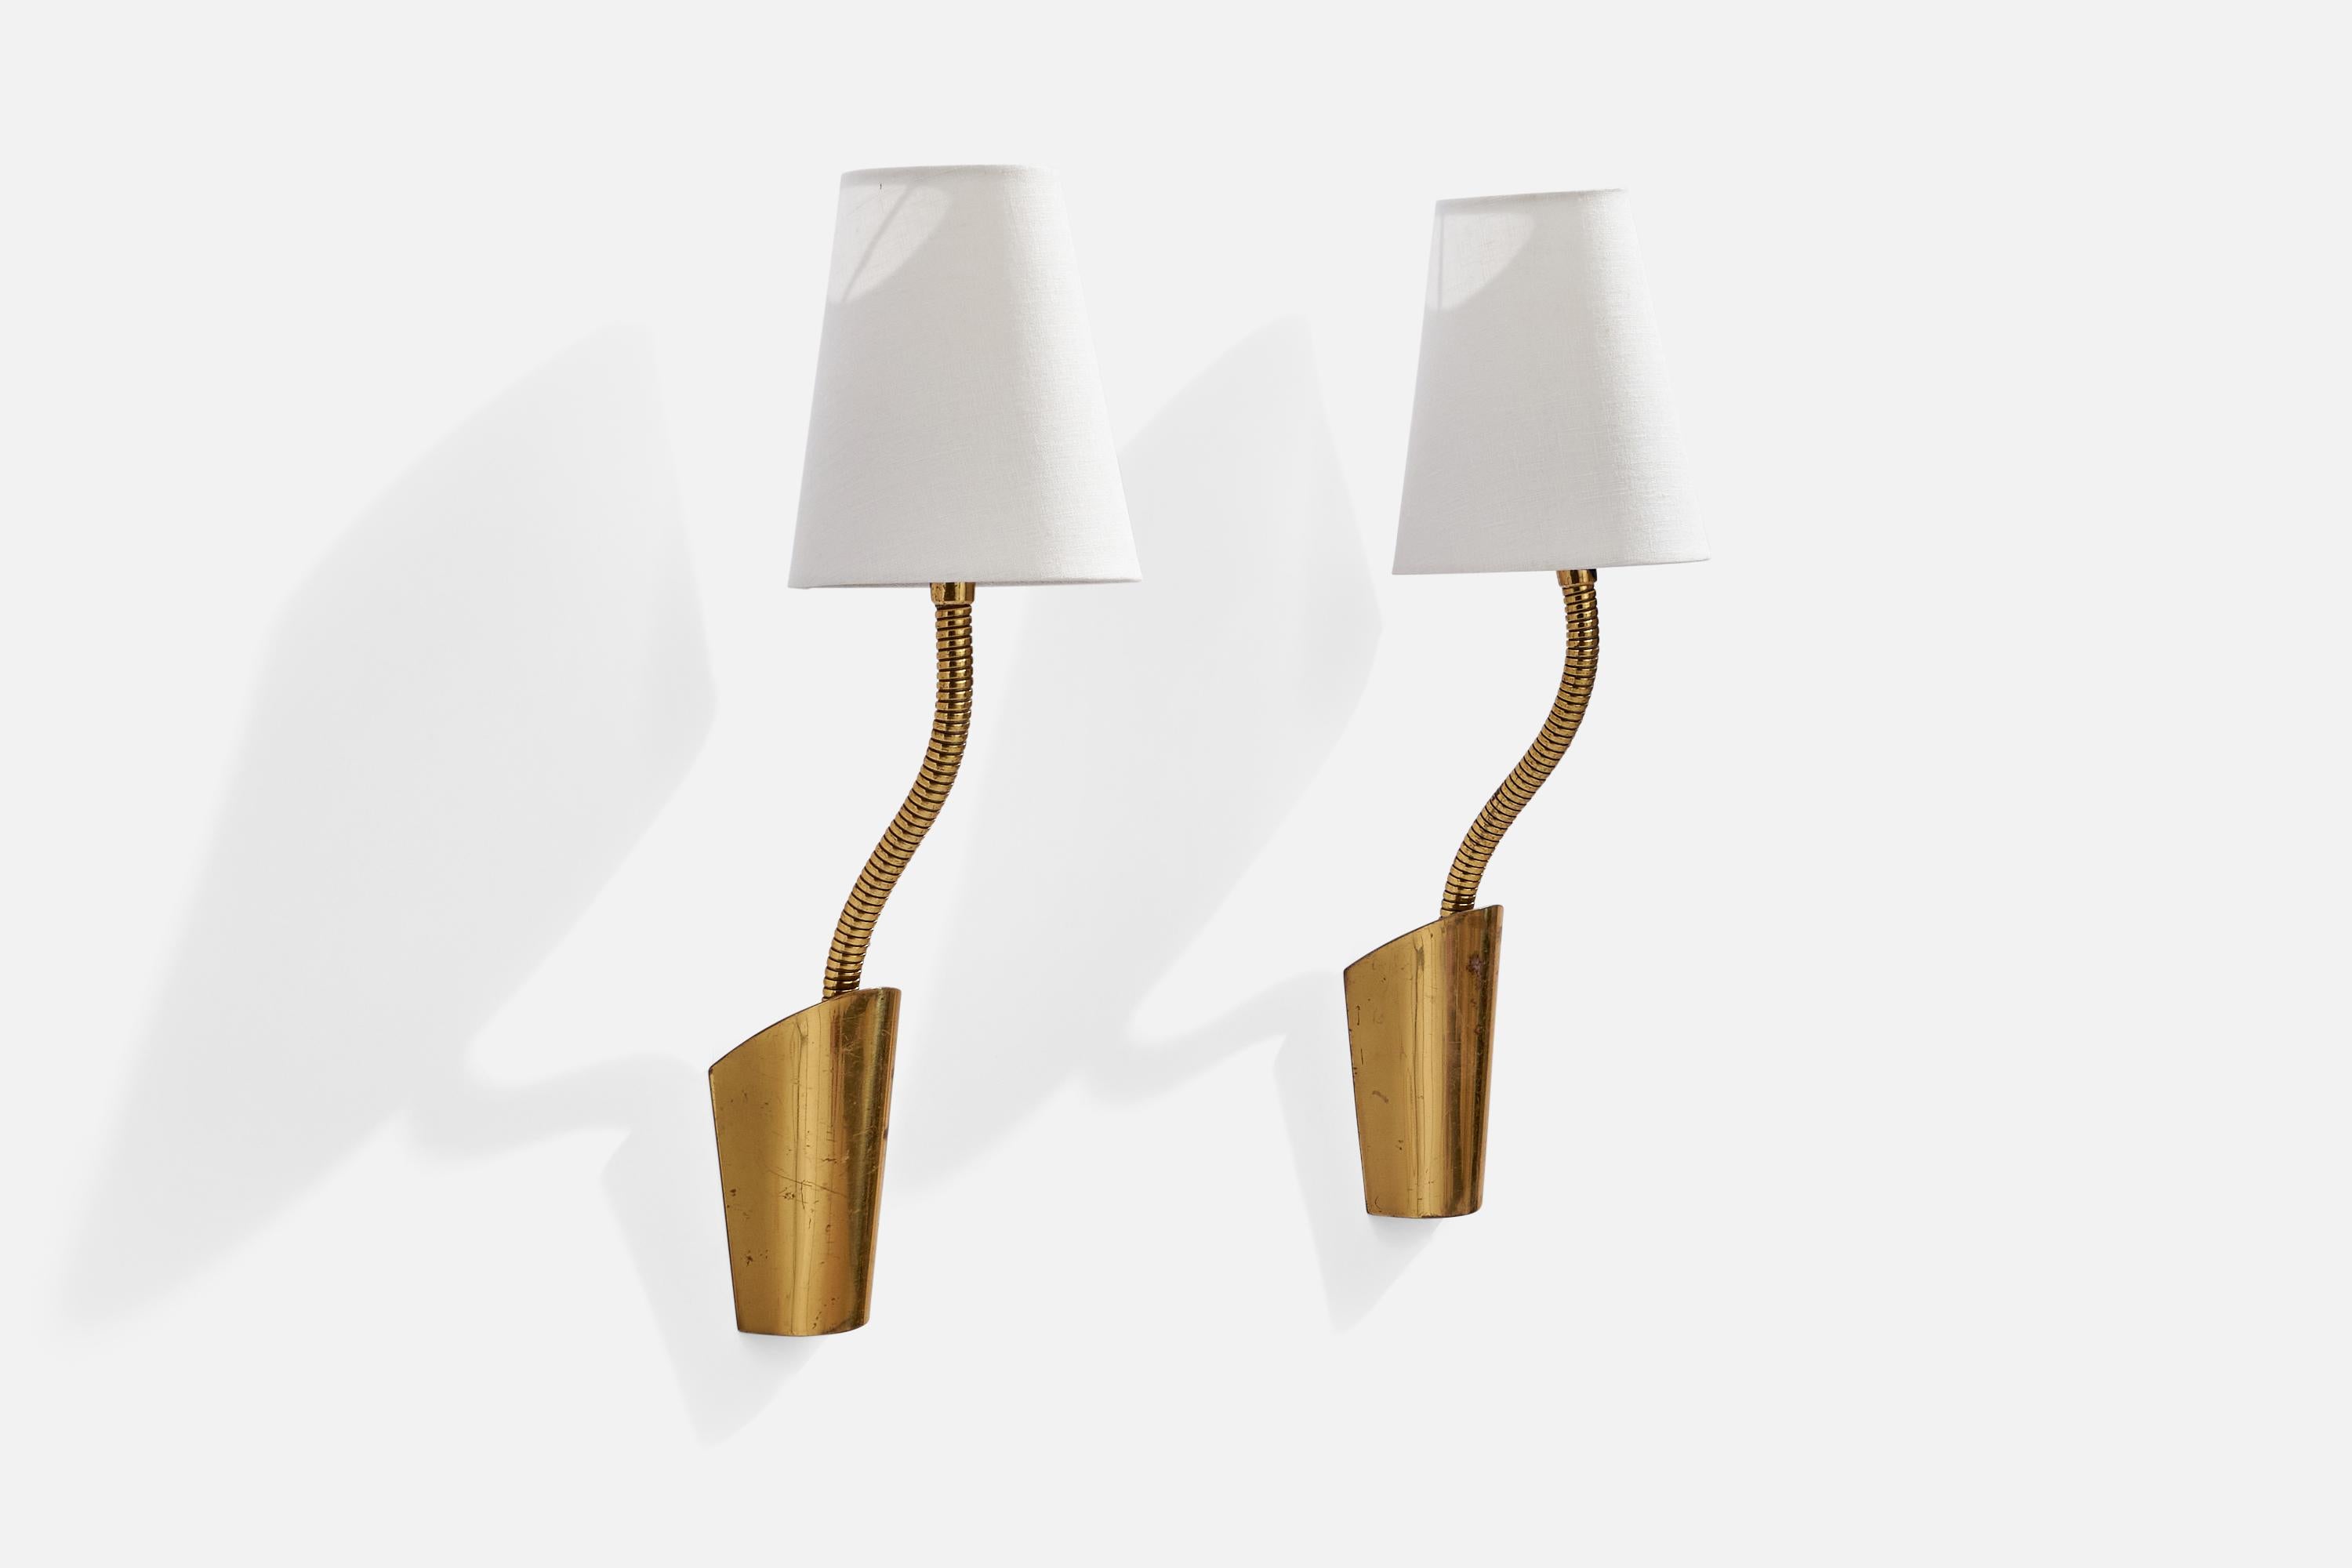 A pair of adjustable brass and fabric wall lights designed and produced by JWA, Sweden, 1950s.

Overall Dimensions (inches): 12” H x 7.5” W x 17.75” D
Back Plate Dimensions (inches): 5.25 H x 3.75” W x 1.5” D
Bulb Specifications: E-26 Bulb
Number of